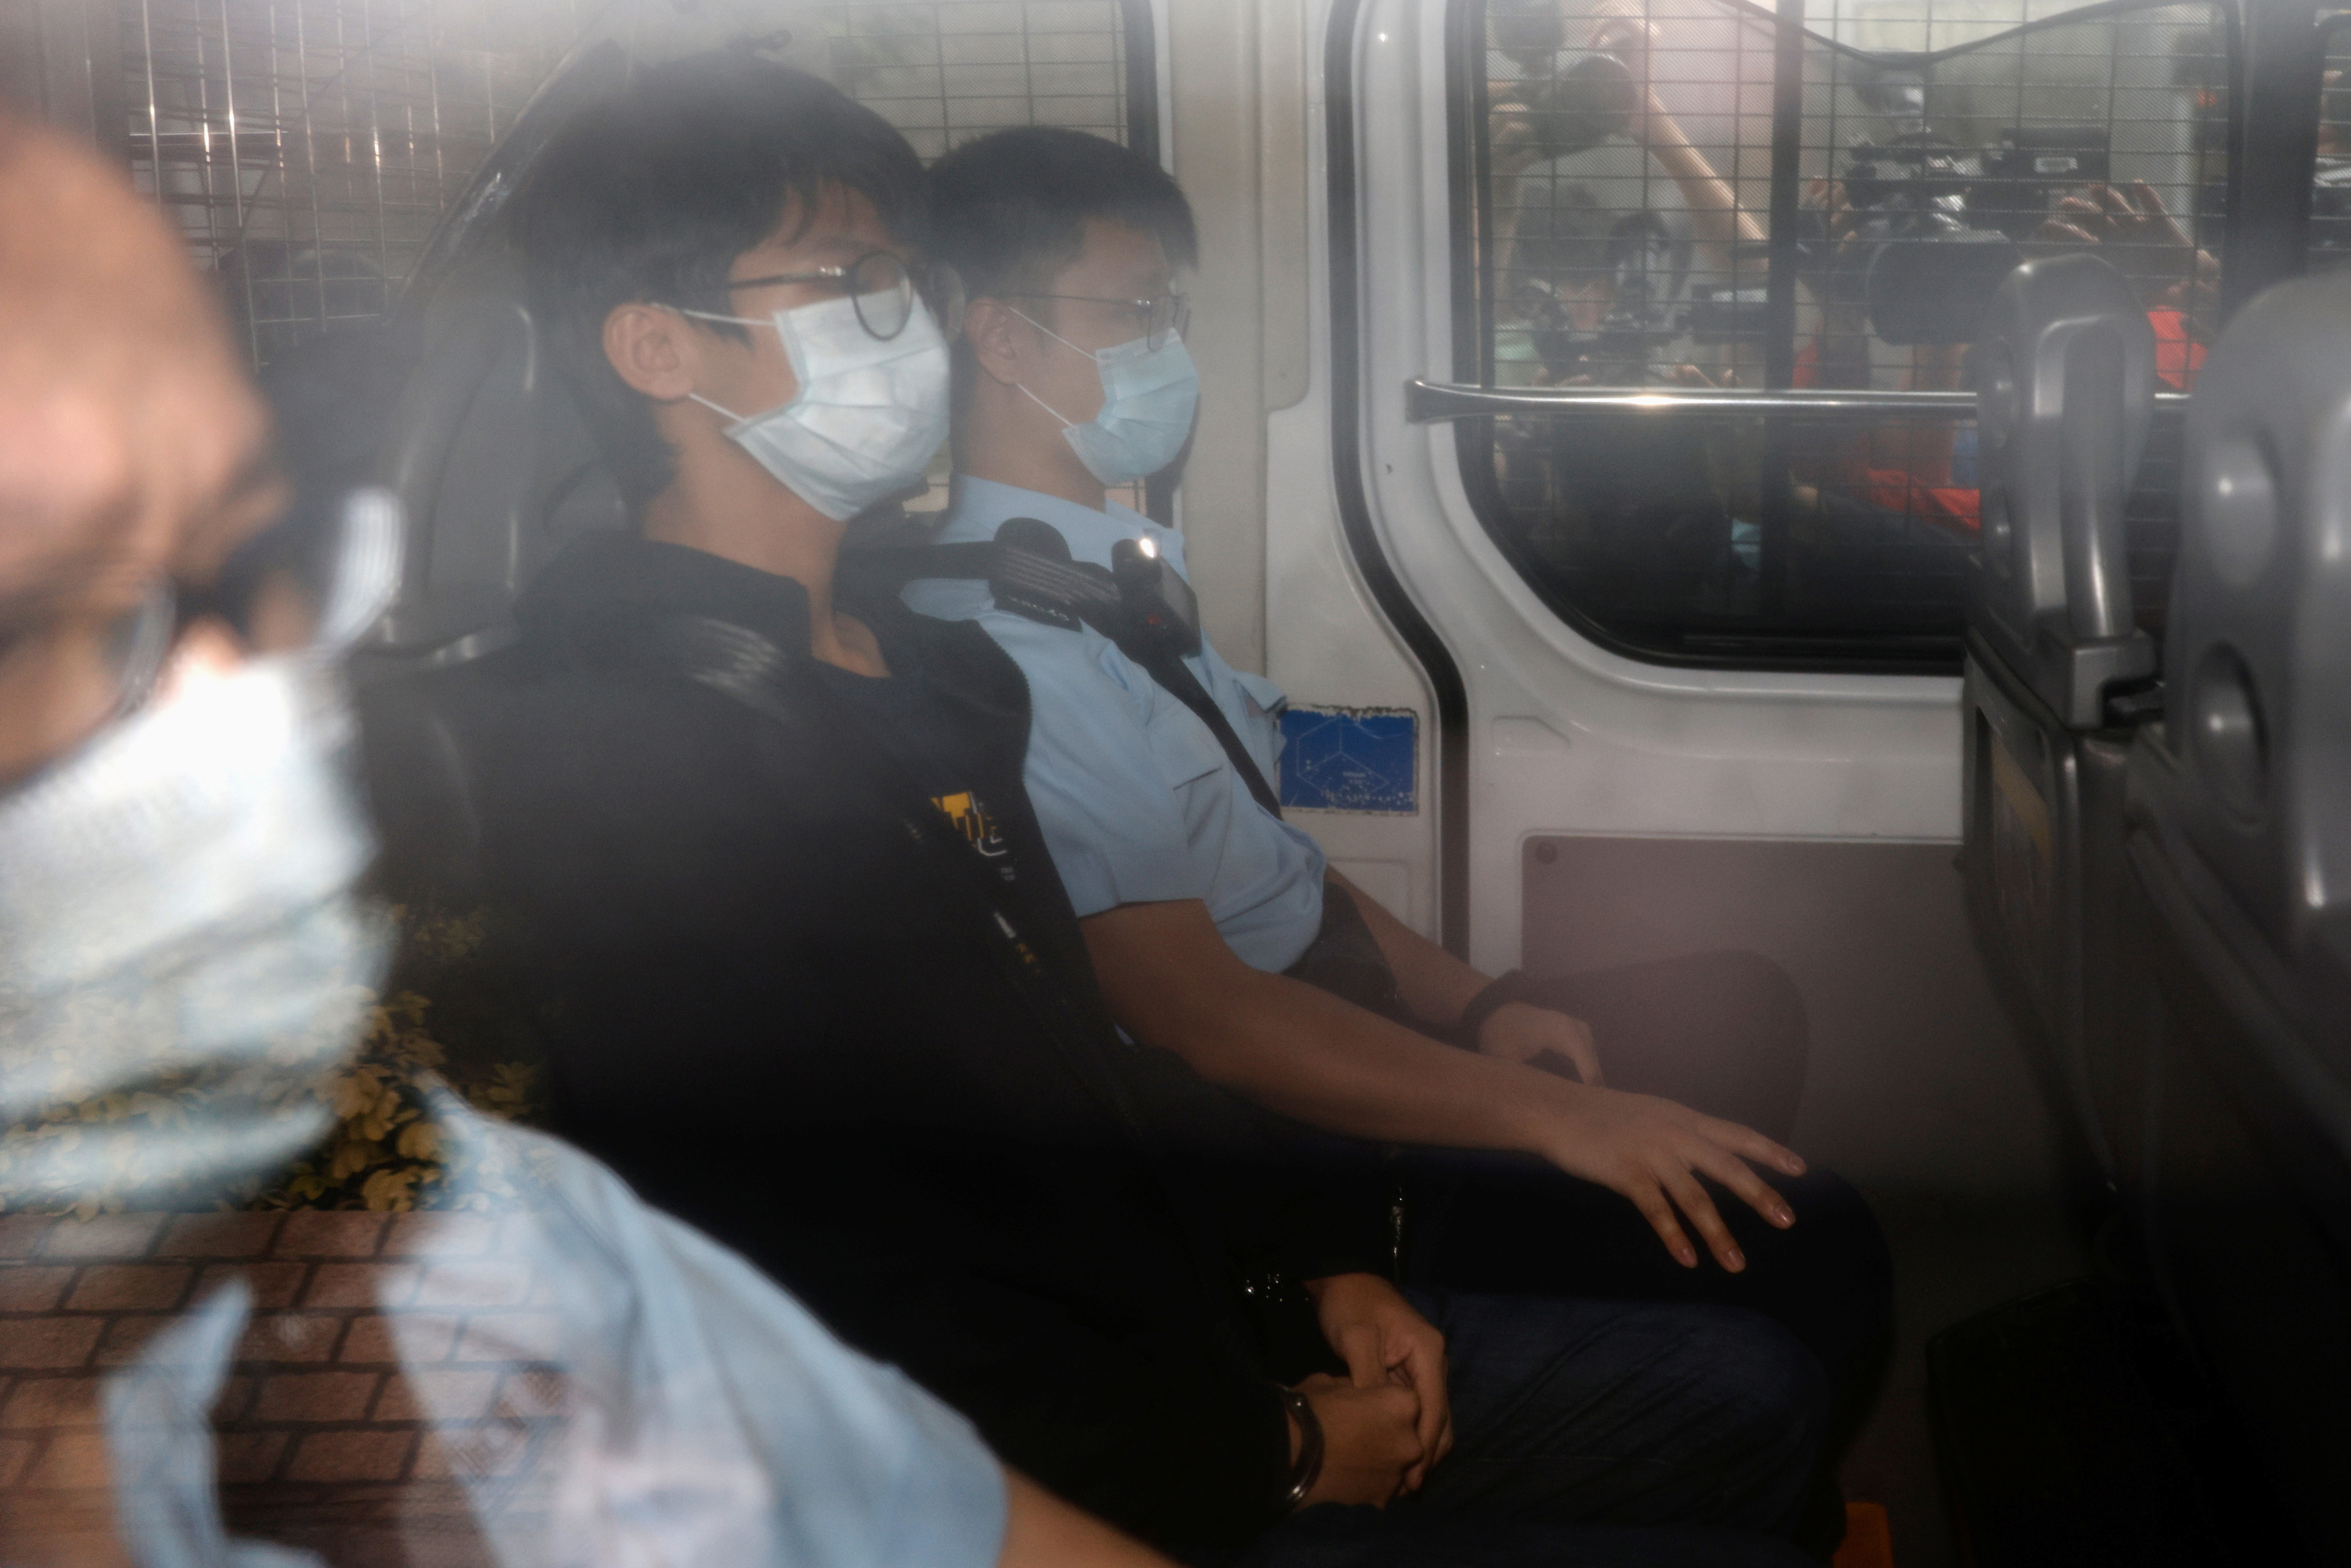 Former convenor of pro-independence group Studentlocalism, Tony Chung Hon-lam arrives at West Kowloon Magistrates‘ Courts in a police van after he was arrested under the national security law, in Hong Kong